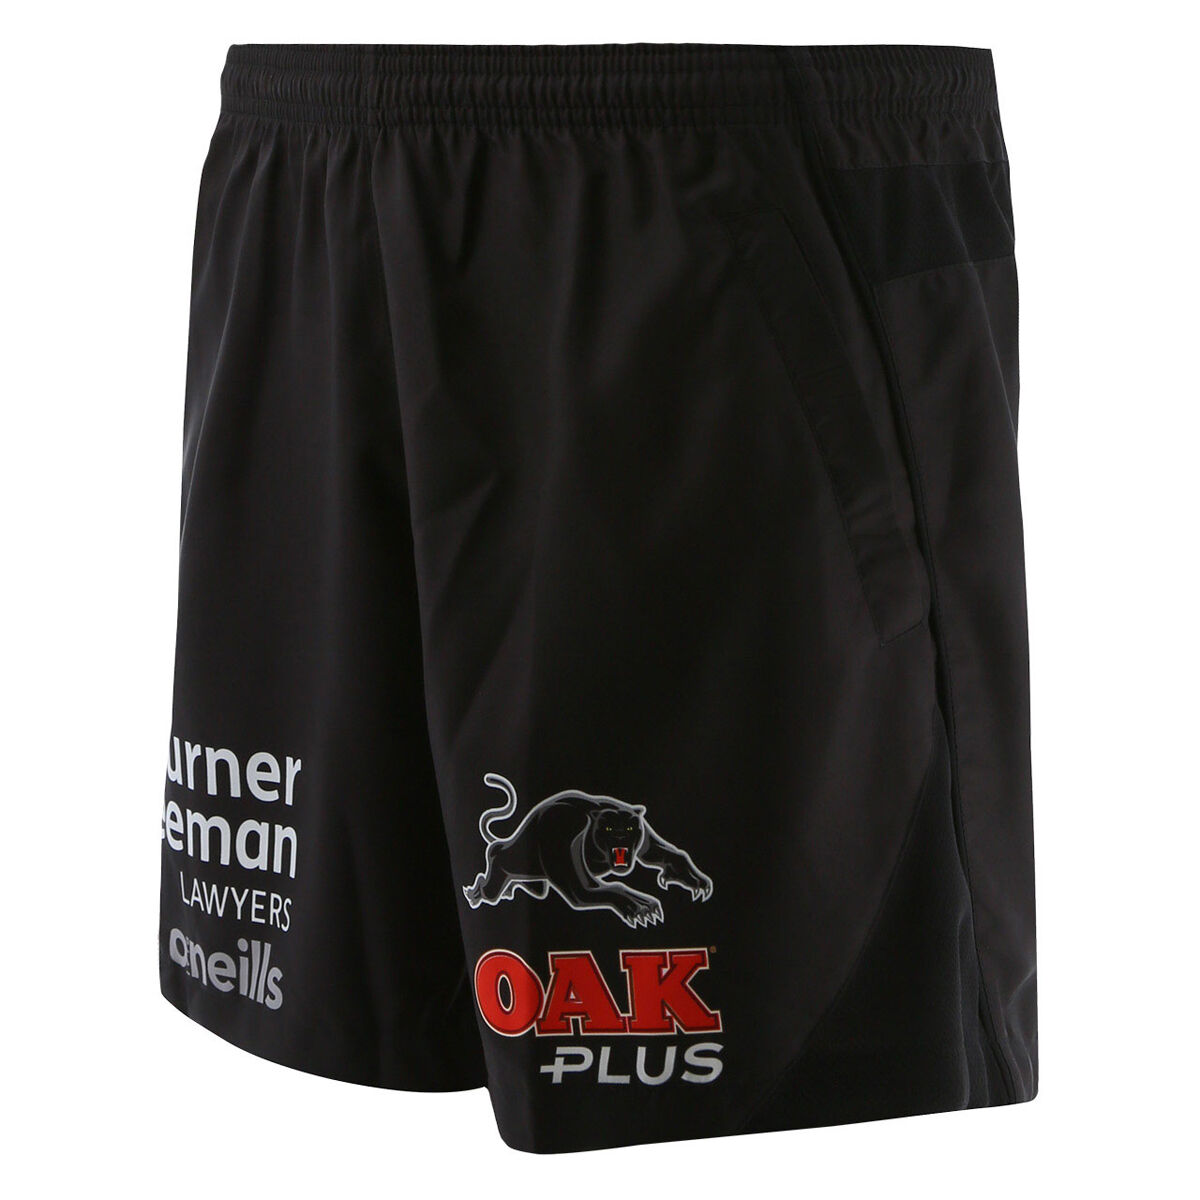 Penrith Panthers NRL Mens Training Shorts Sizes S-5XL BNWT 